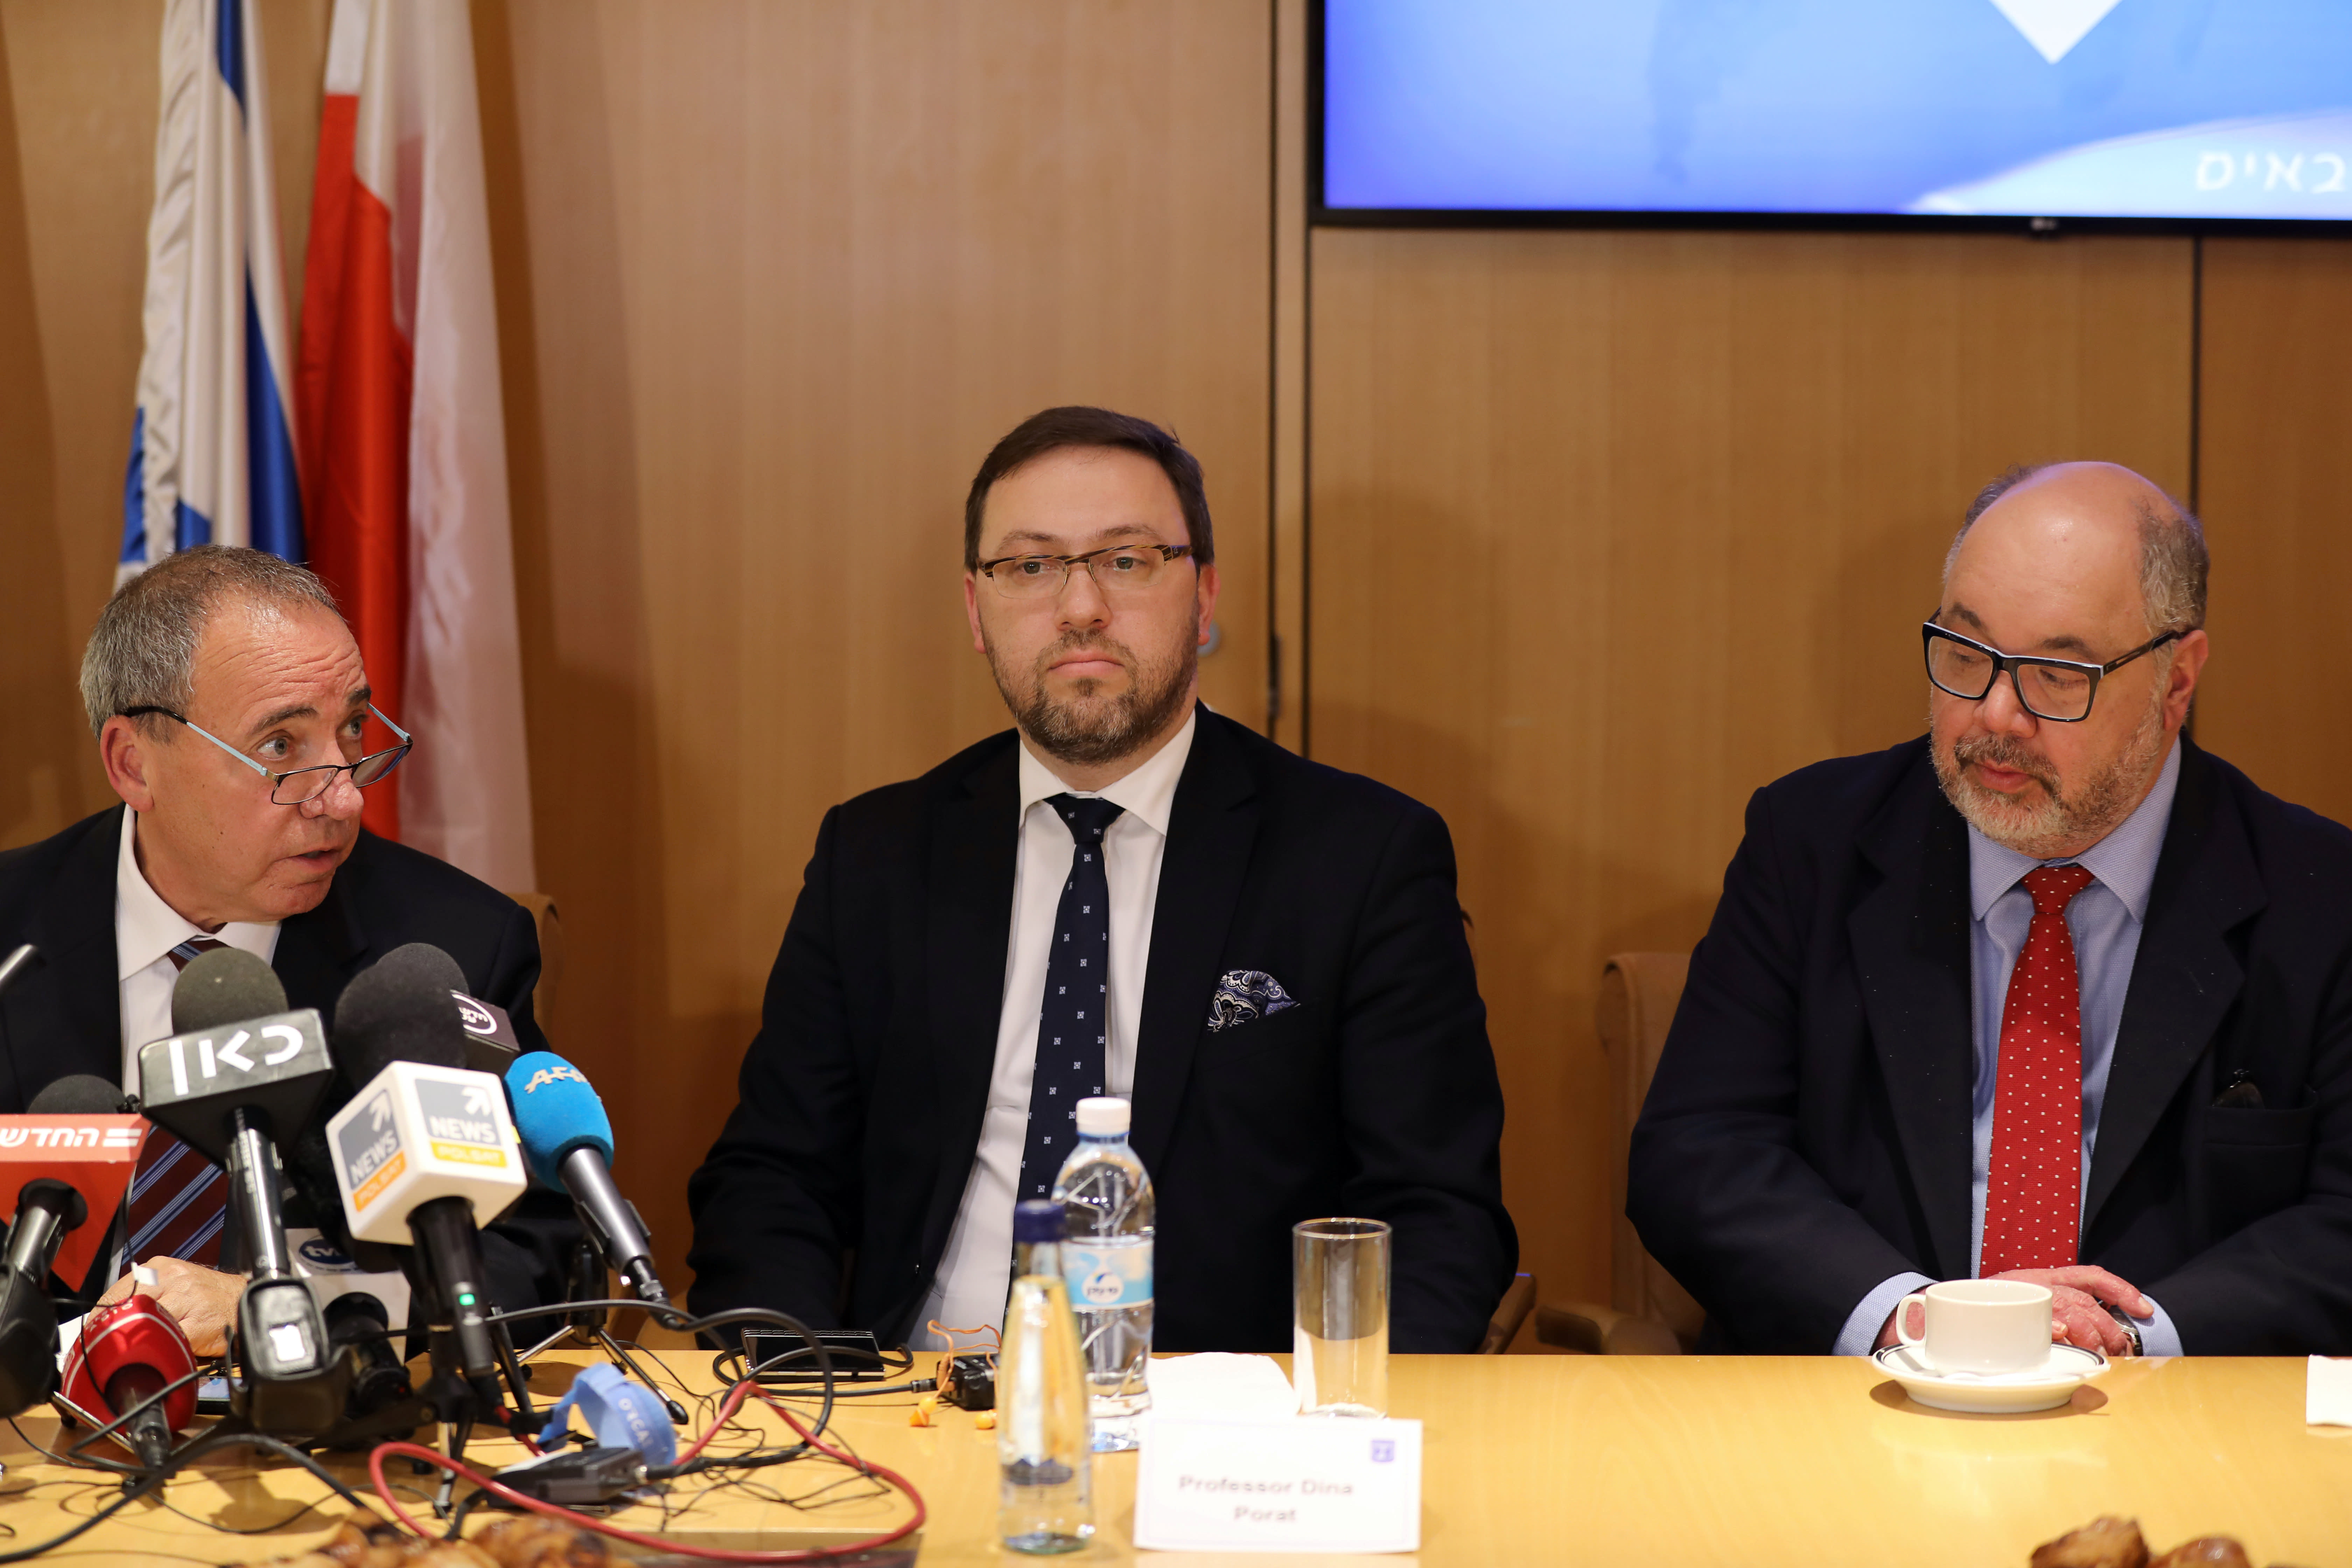 Israeli Director General of the Ministry of Foreign Affairs Yuval Rotem (L) speaks during a joint meeting with Polish Deputy Foreign Minister Bartosz Cichocki (C) at the Ministry of Foreign Affairs, in Jerusalem, March 1, 2018. (Reuters/Ammar Awad)